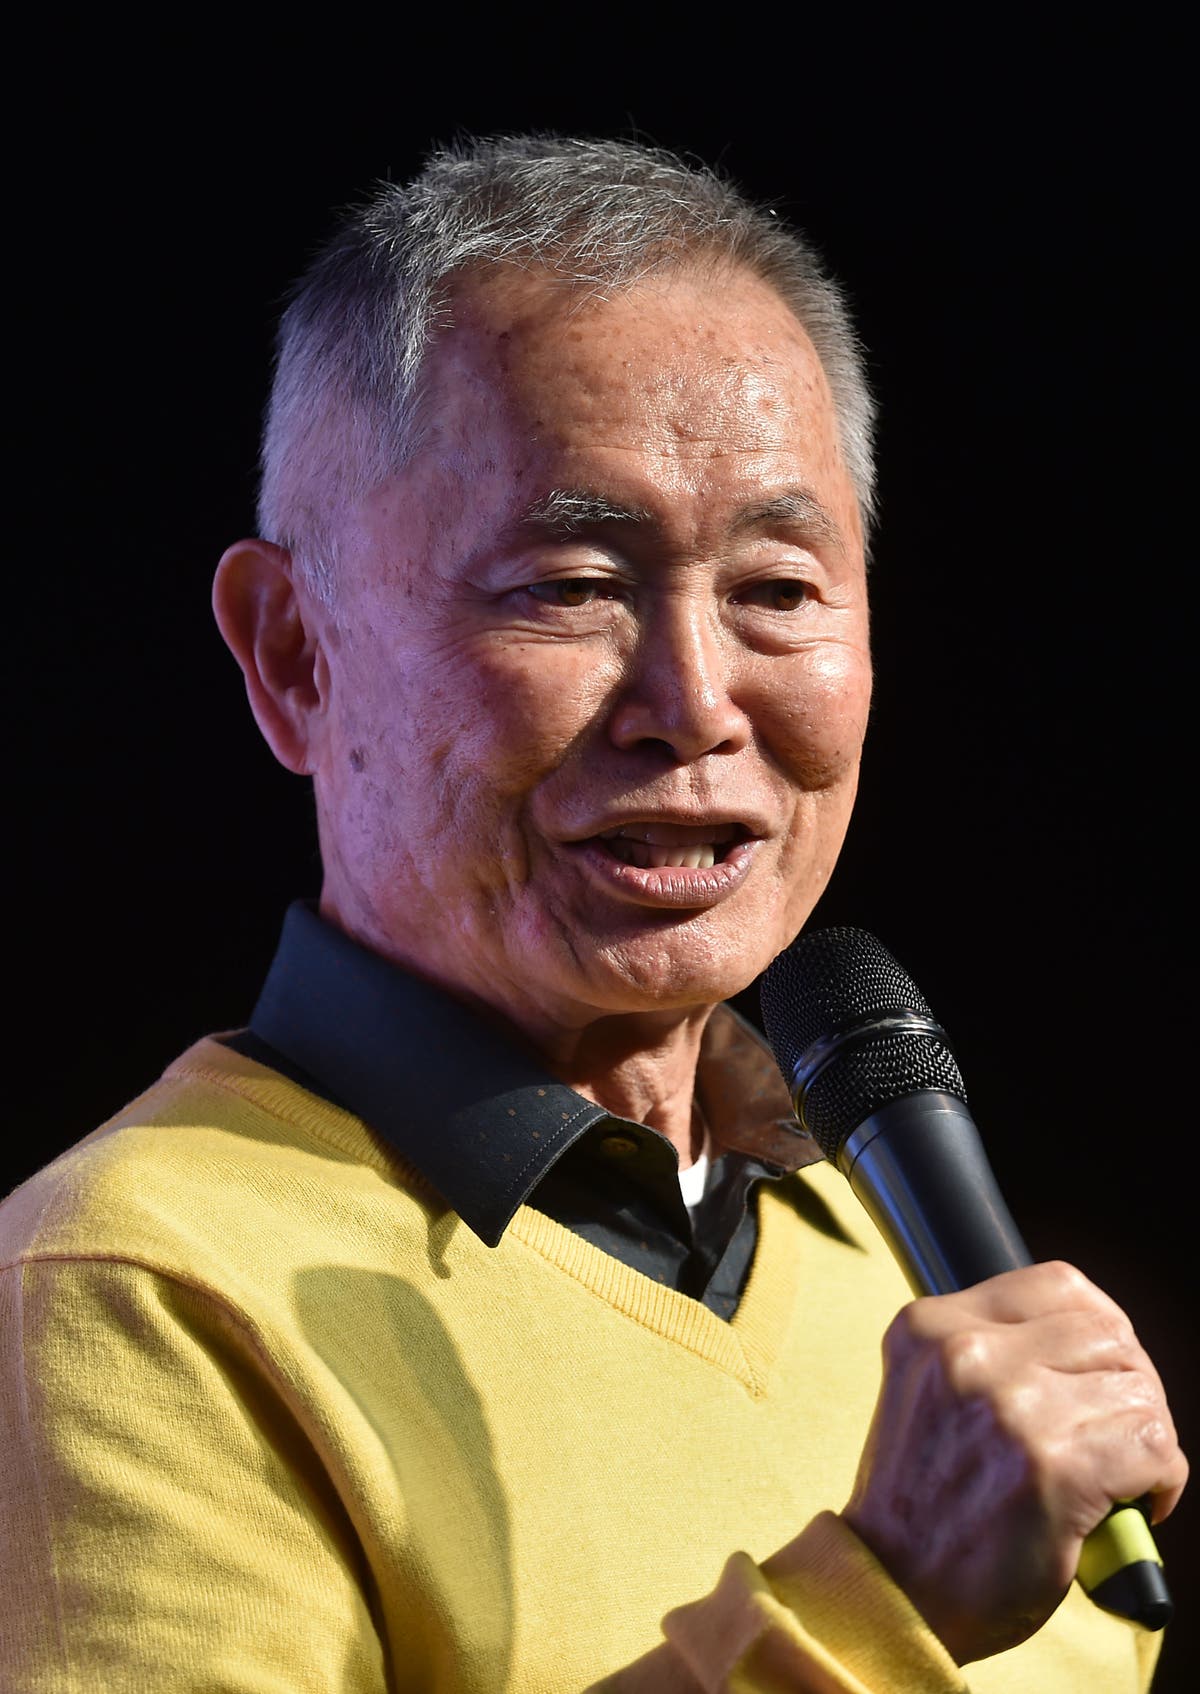 George Takei shares personal stories about lifelong friend Nichelle Nichols